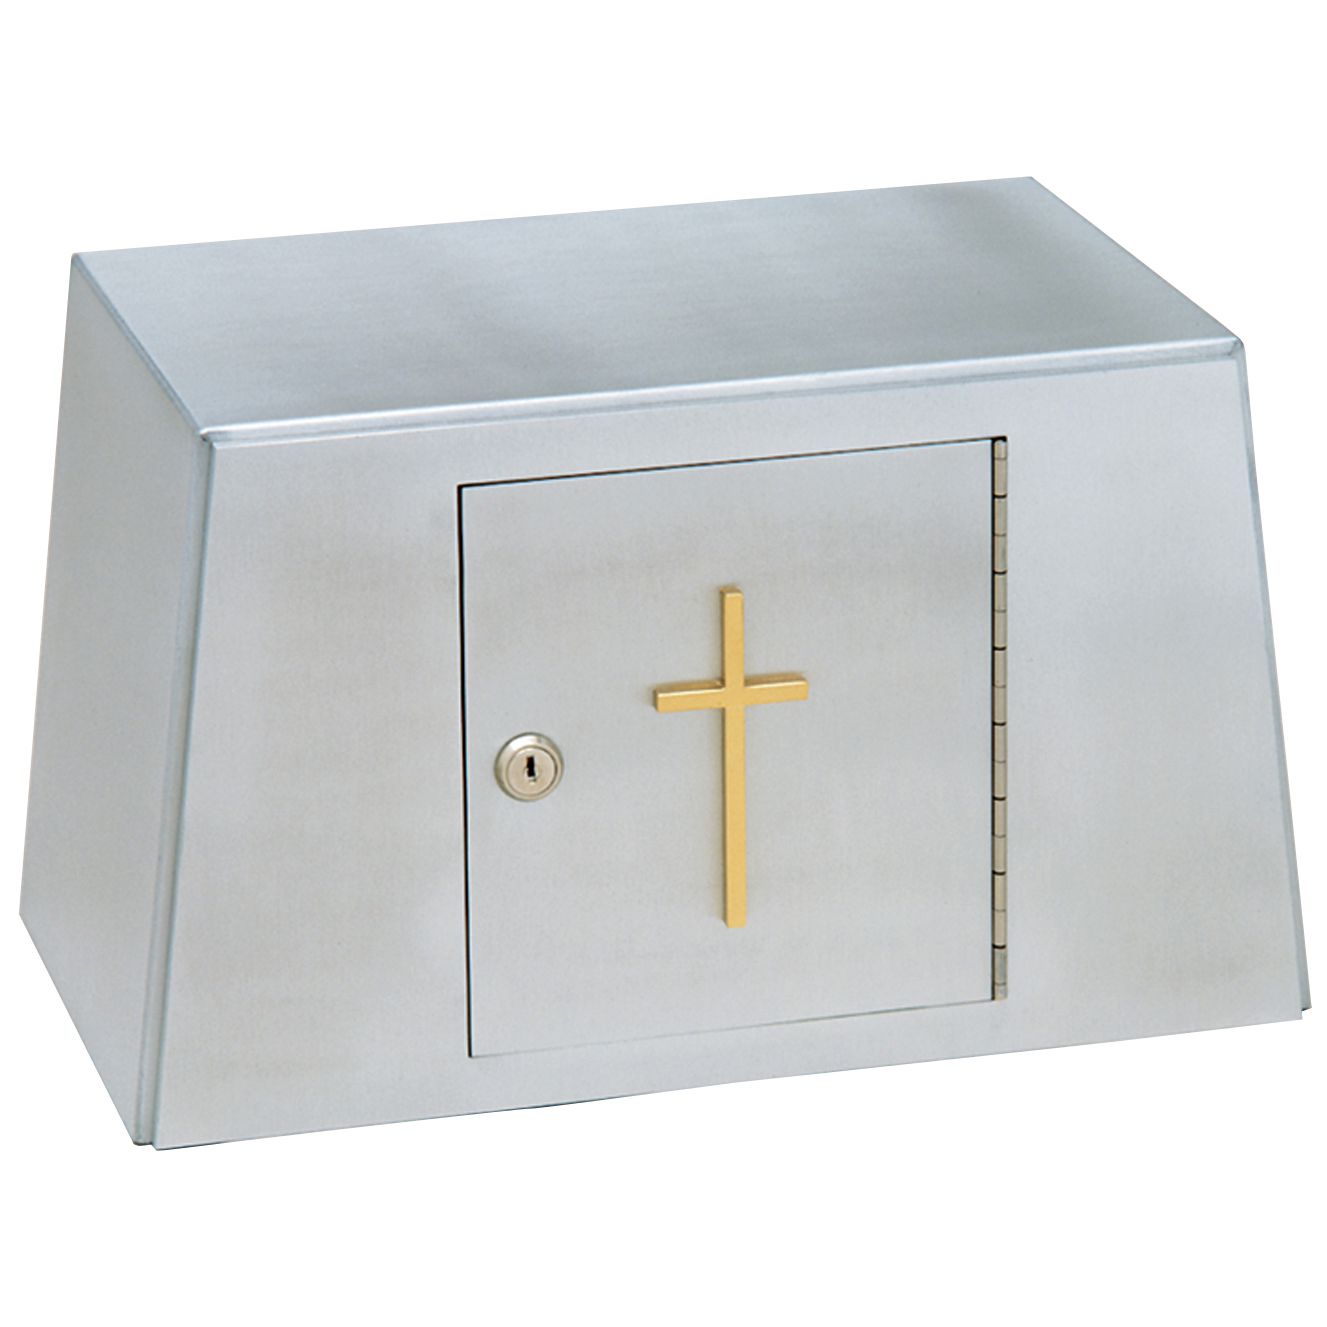 K334 Tabernacle Aluminum with Bright Brass Cross  Tabernacle has Base 15-1/2" W, Top 9" H x 13" W x 9" D  White Interior  FREE SHIPPING